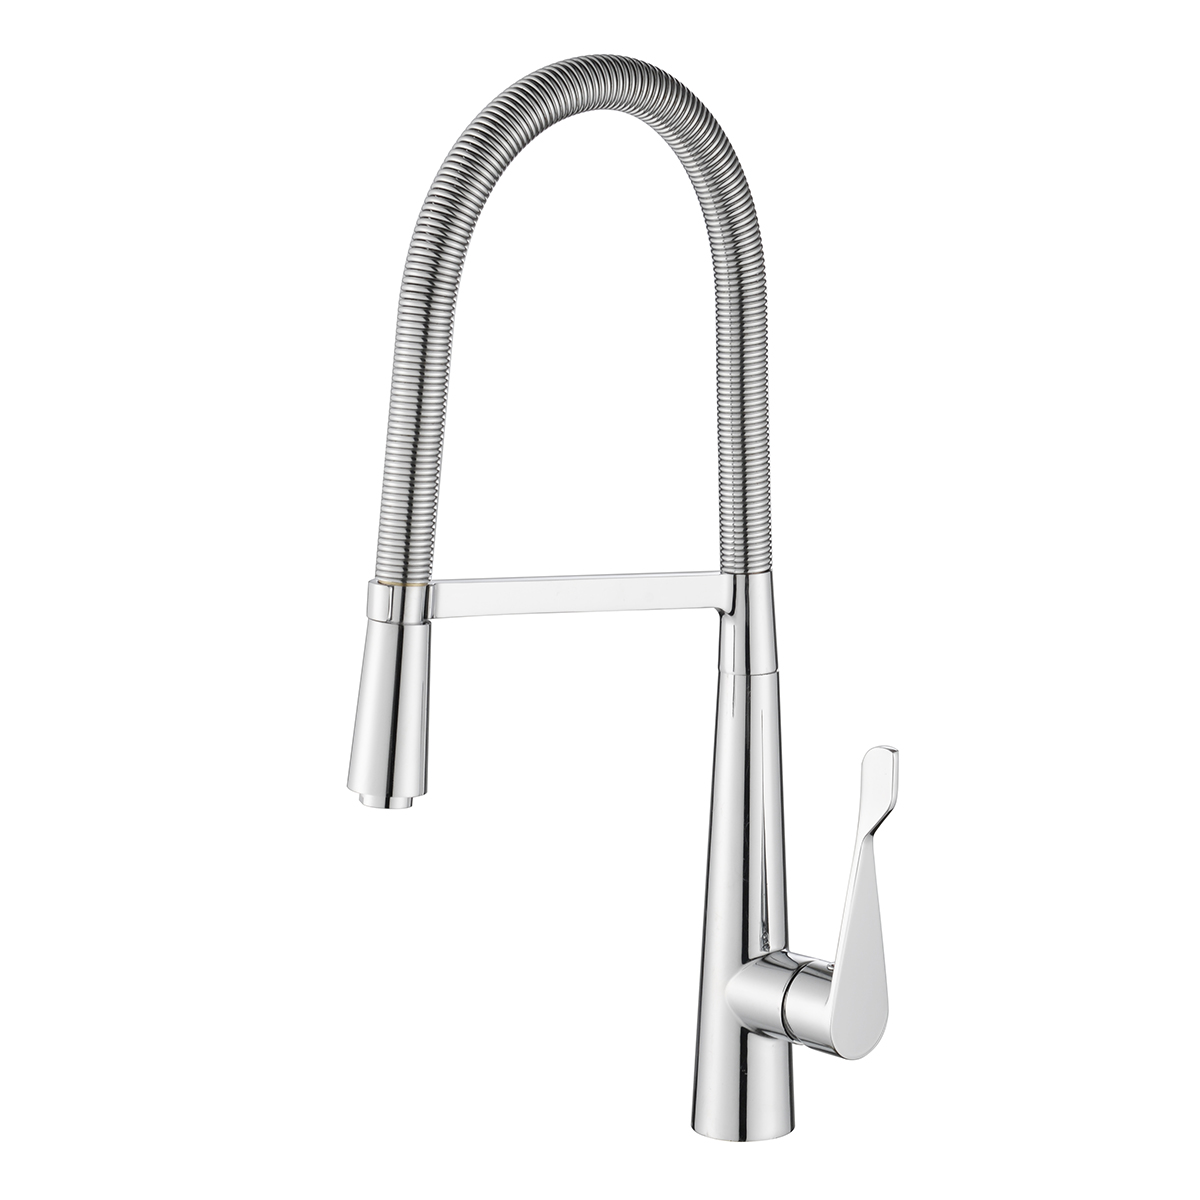 Aquacubic cUPC Sanitary Commercial Modern Single Handle Spring Kitchen Sink Faucet AF1017-5